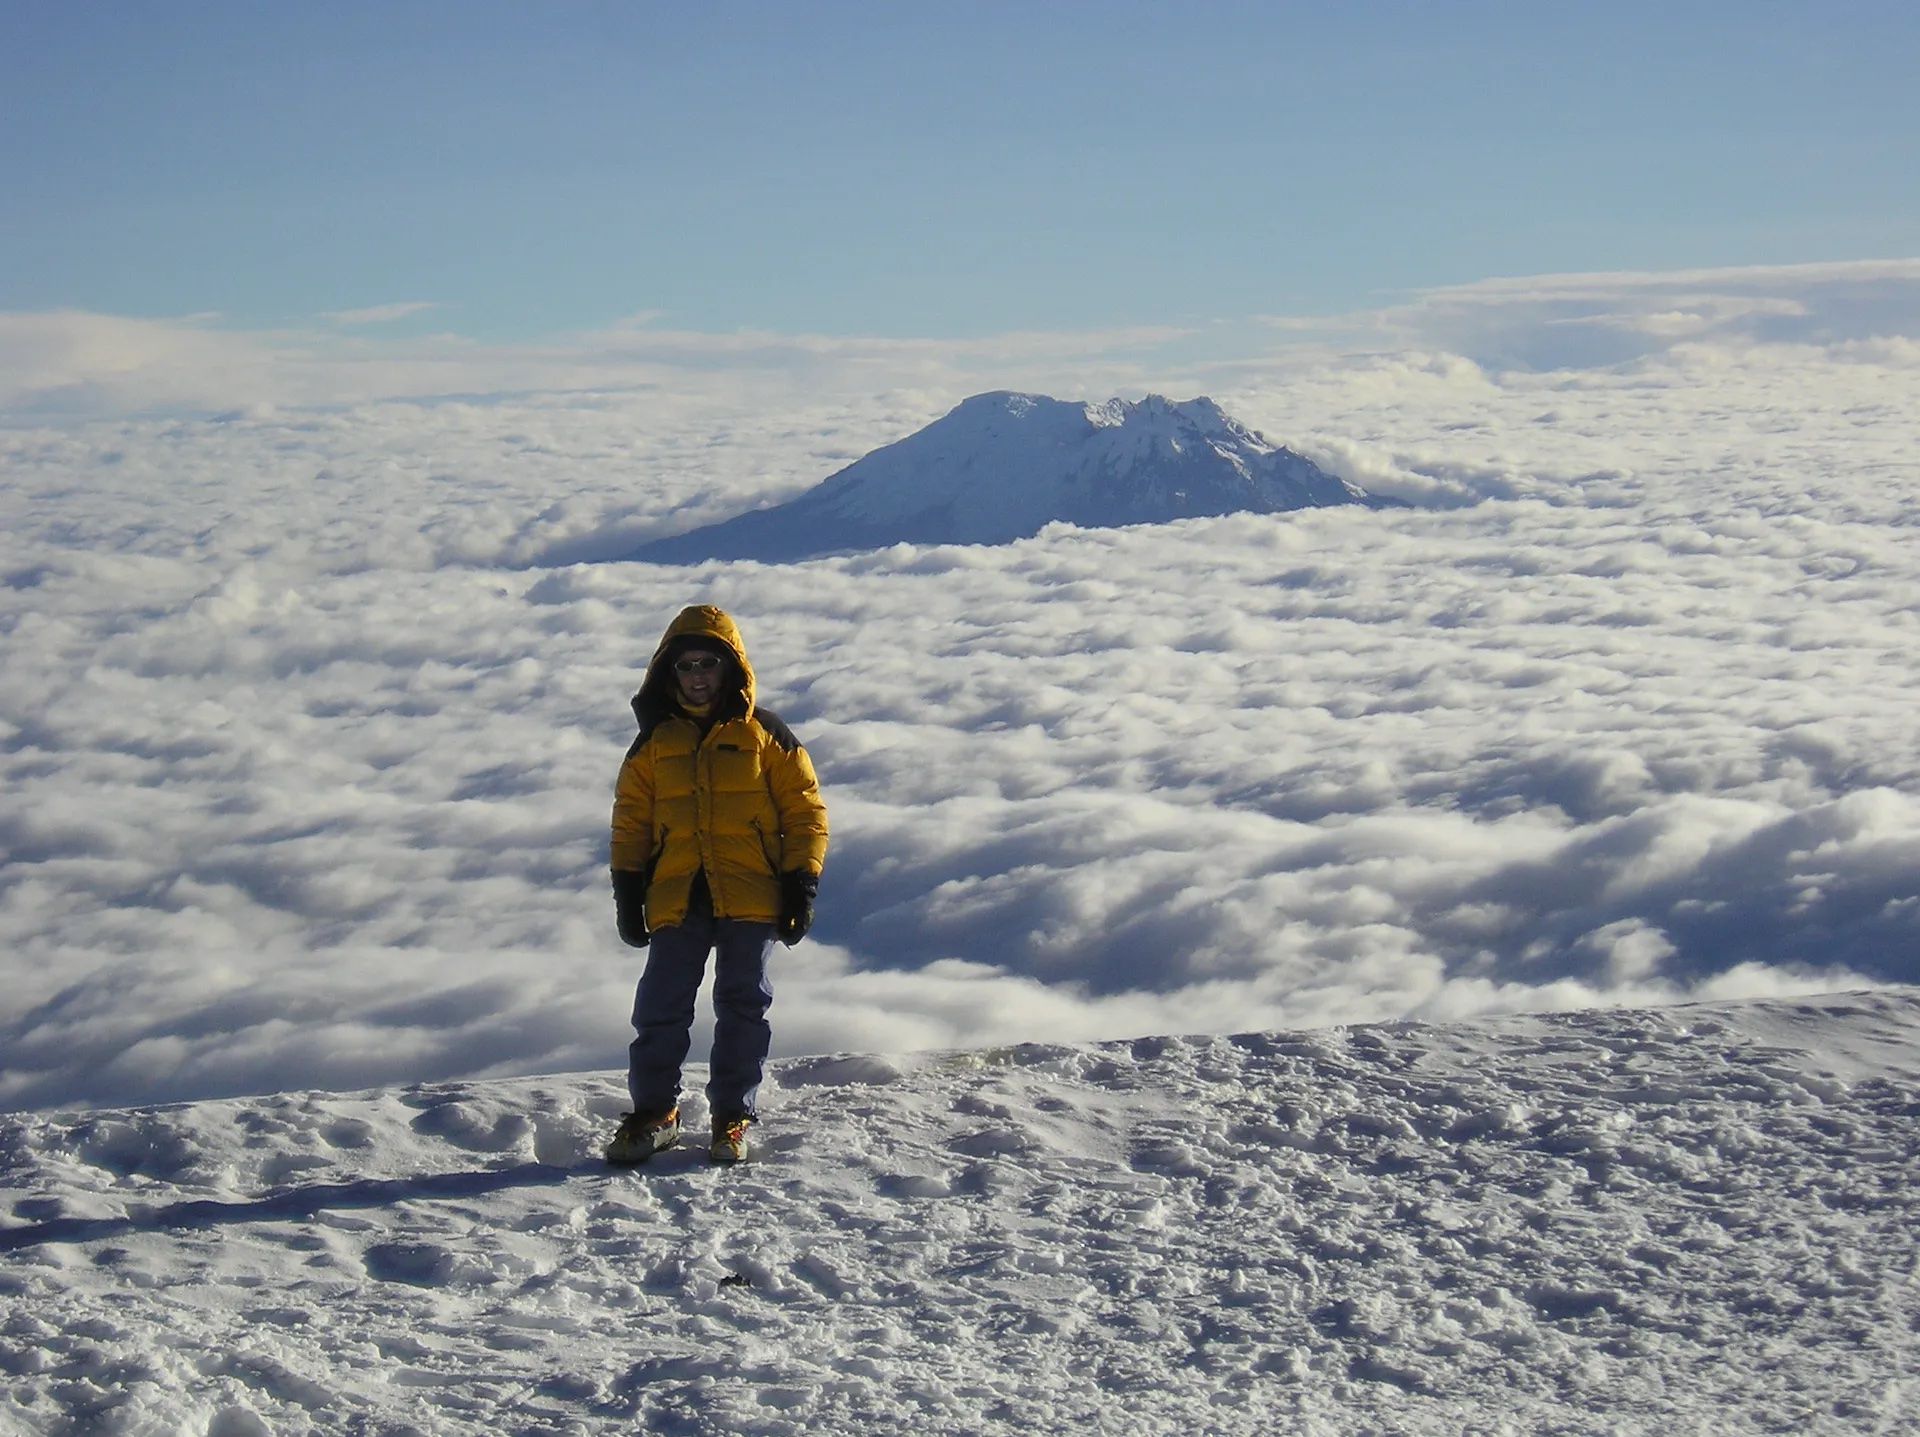 A climber standing on the summit of Cotopaxi Volcano, with a sea of clouds behind them.